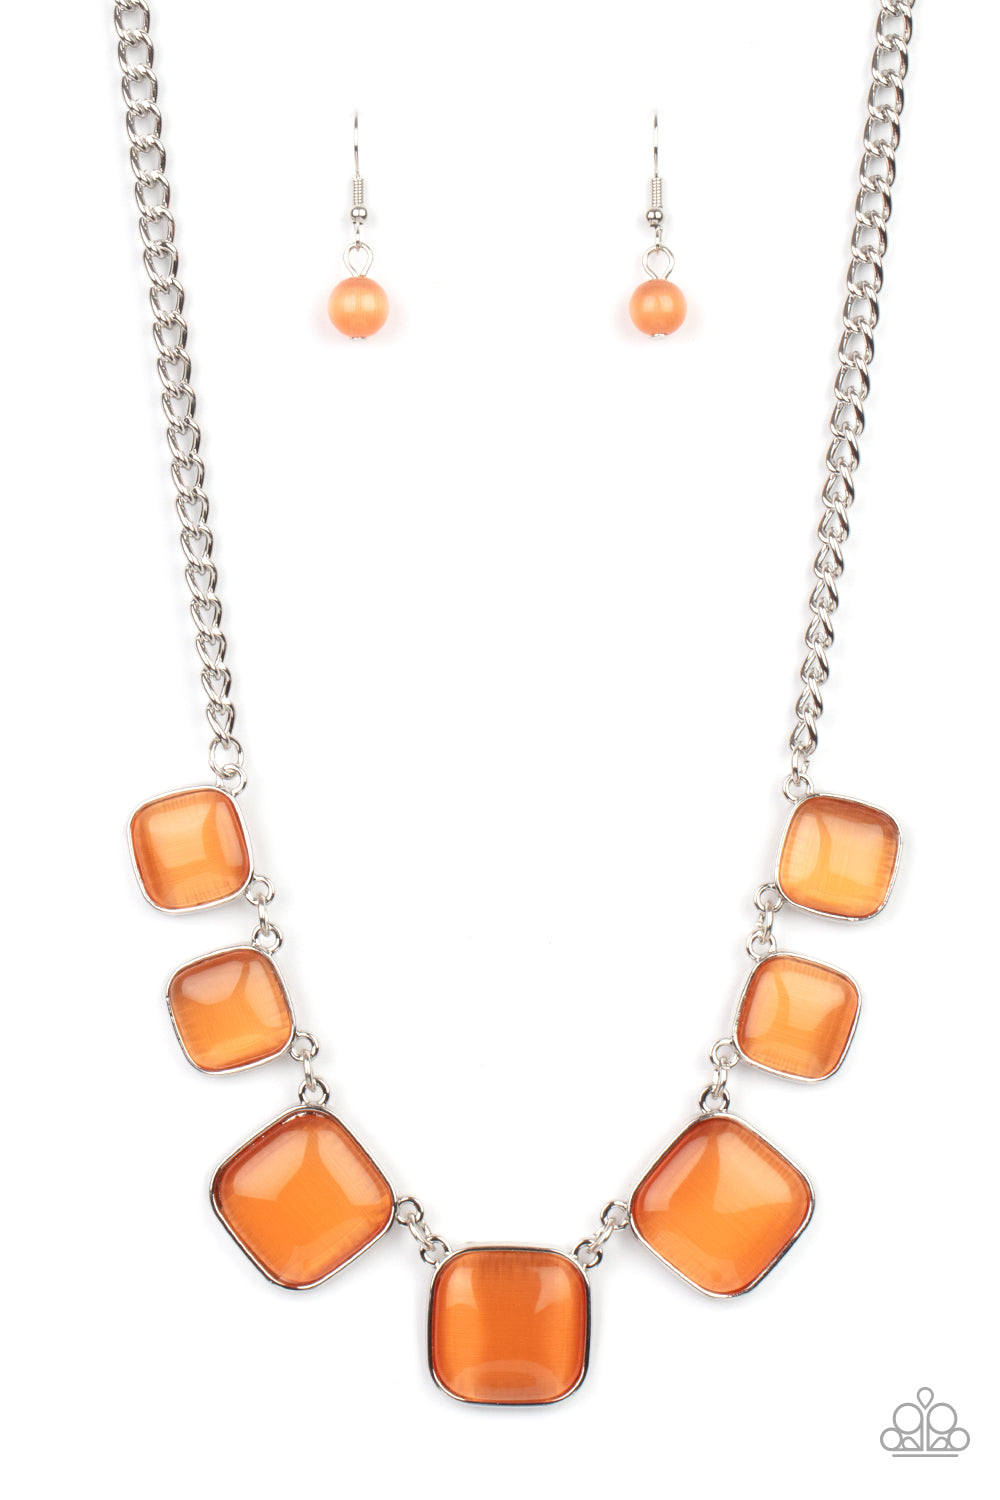 Aura Allure Orange Necklace - Paparazzi Accessories  Encased in square silver fittings, a dewy collection of orange cat's eye stones gradually increase in size as they link below the collar for a whimsical pop of color. Features an adjustable clasp closure.  ﻿All Paparazzi Accessories are lead free and nickel free!  Sold as one individual necklace. Includes one pair of matching earrings.